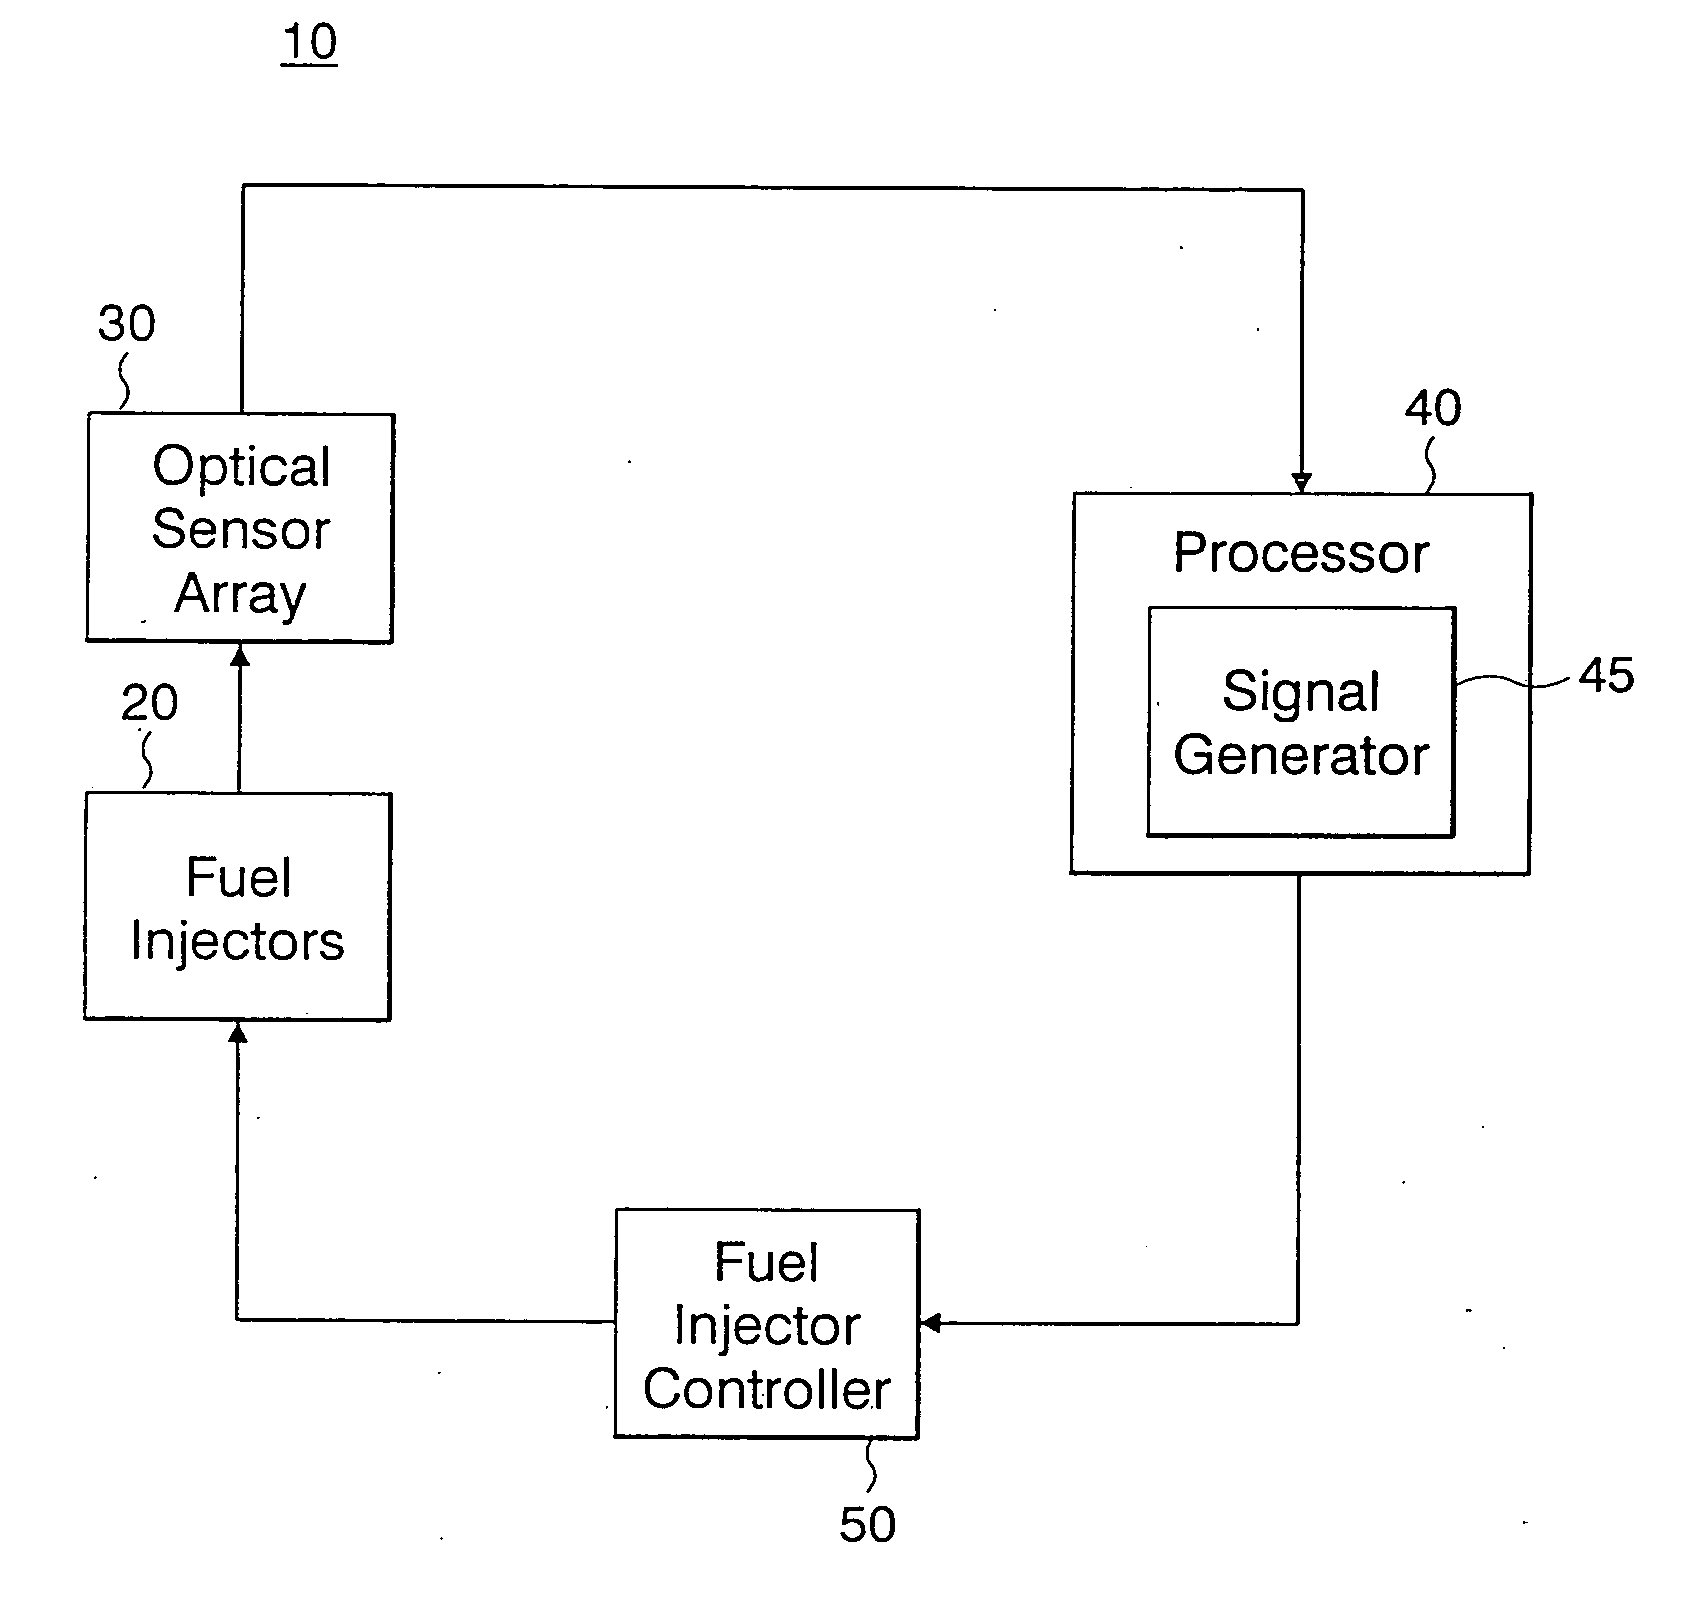 Apparatus for observing combustion conditions in a gas turbine engine